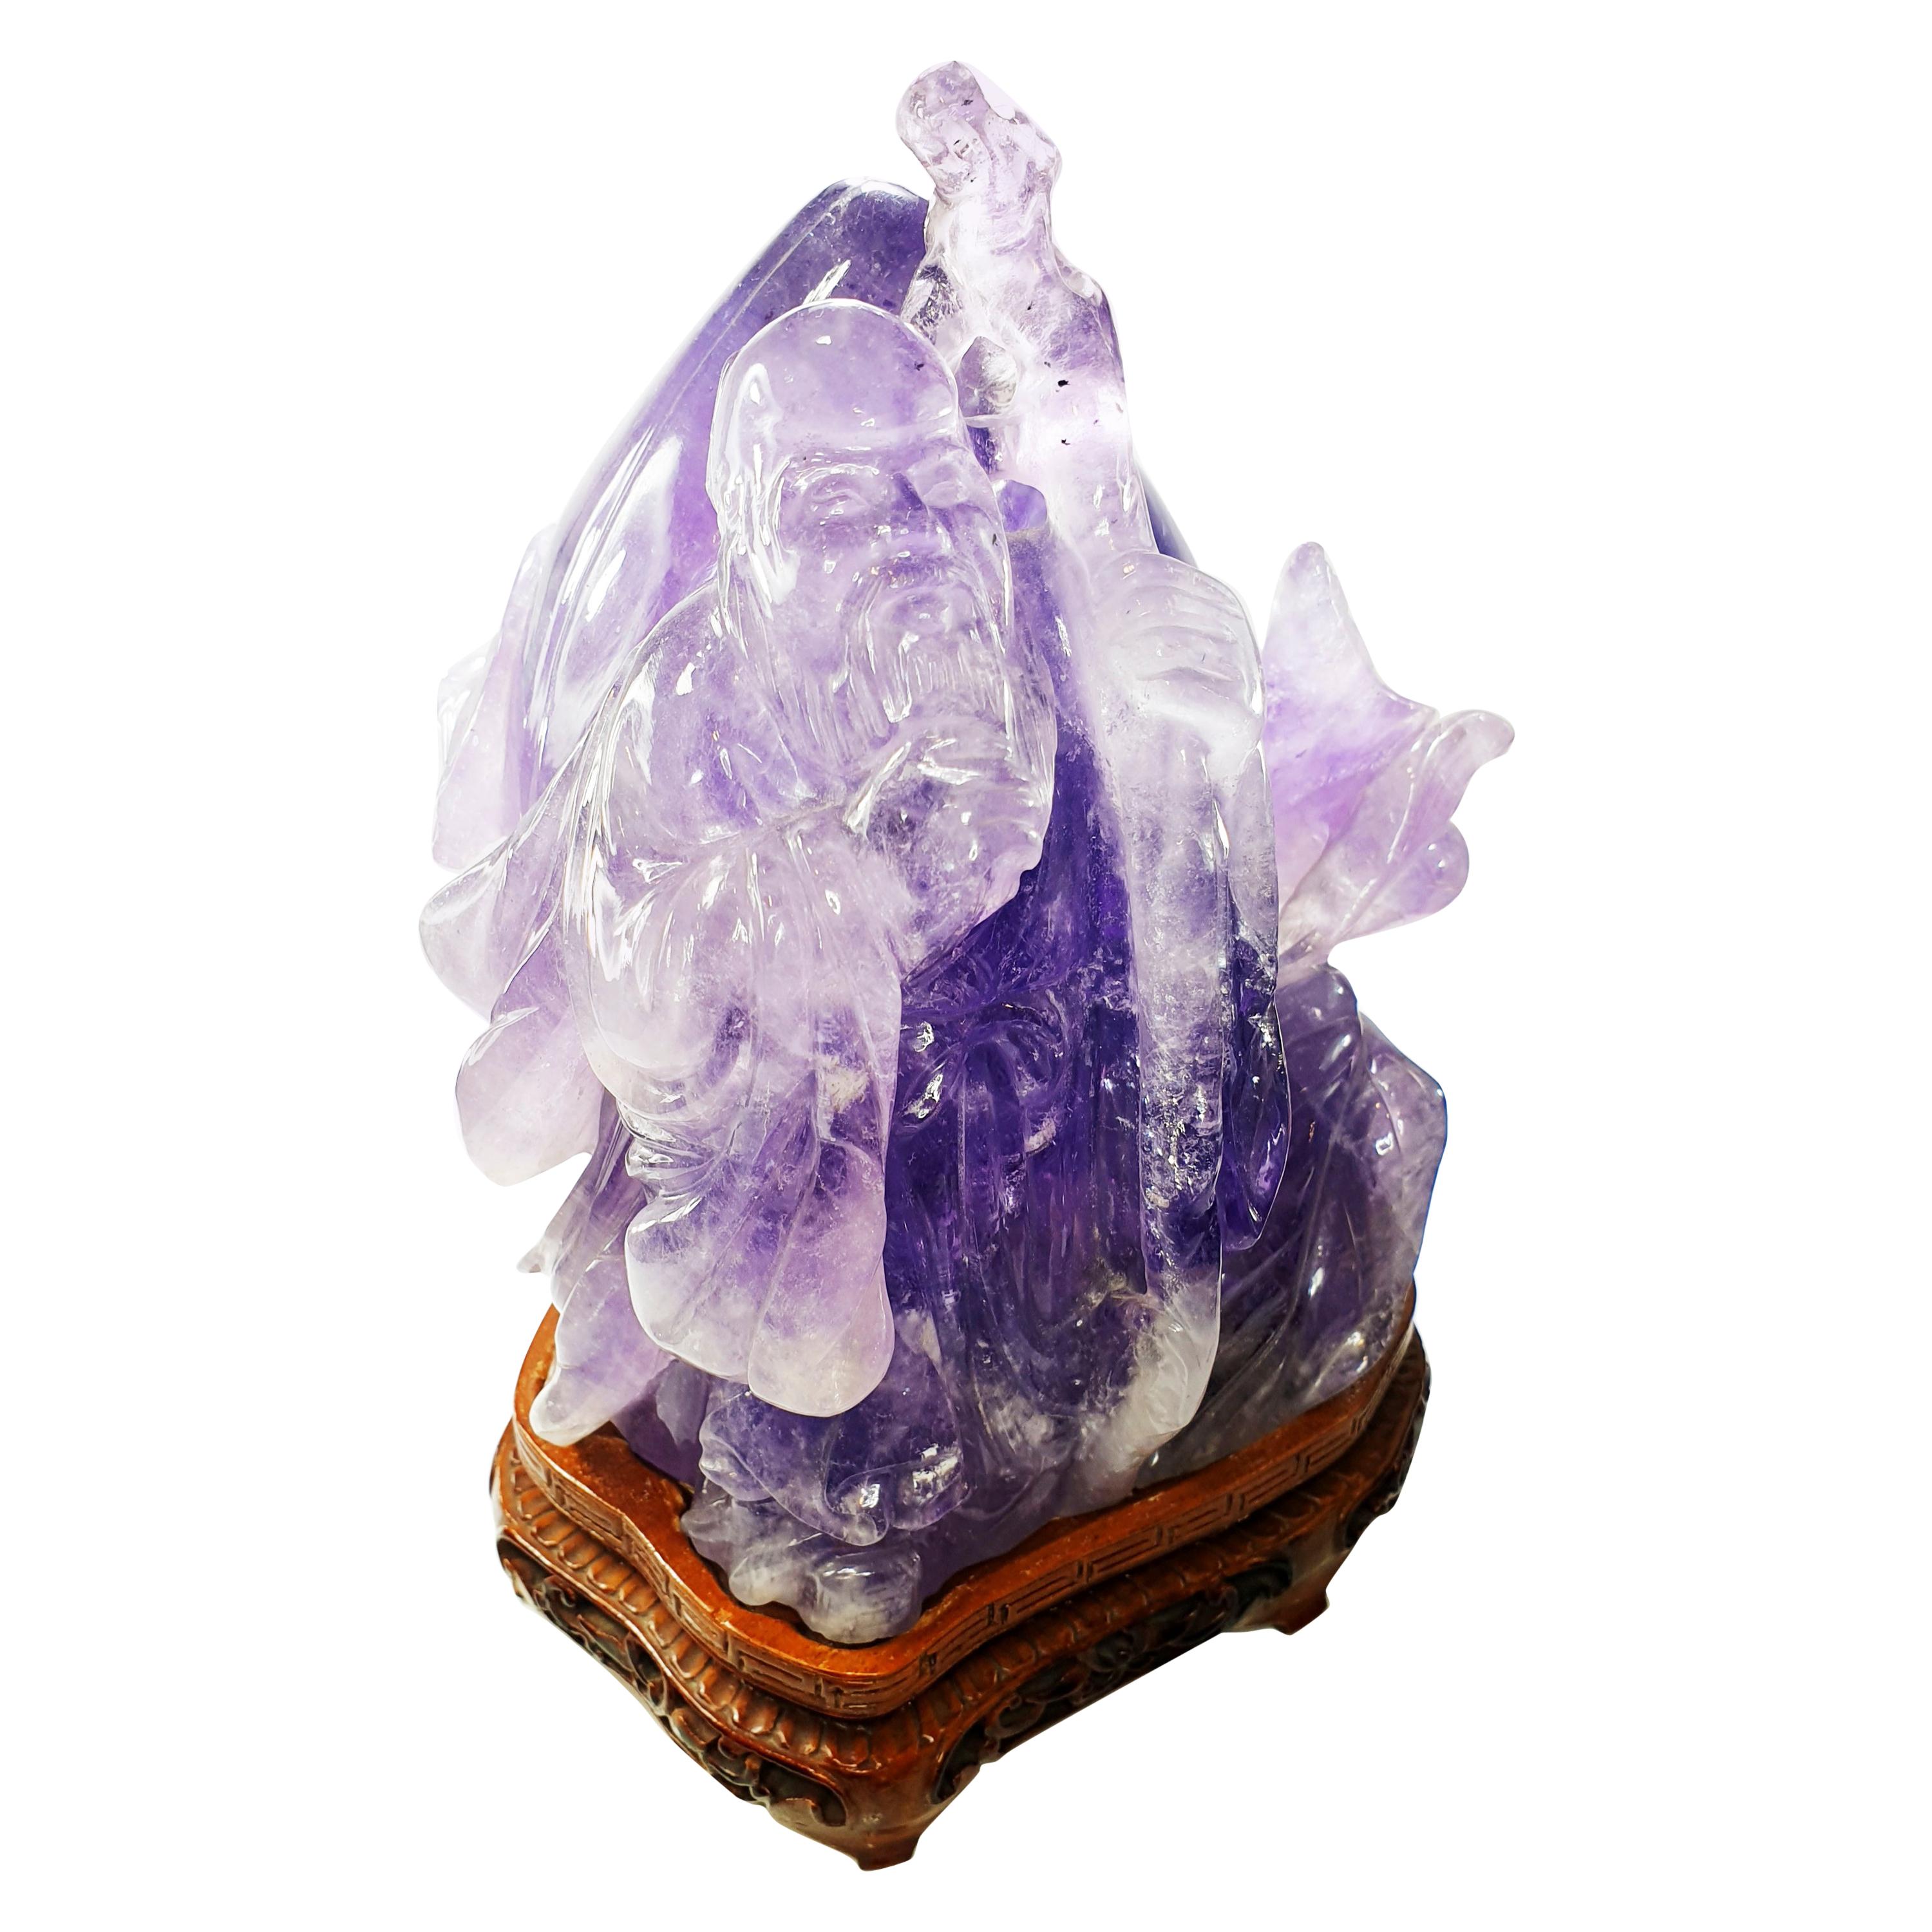 Carved 3.5kg Hardstone Amethyst Figure of Shoulao the Inmortal Chinese God For Sale